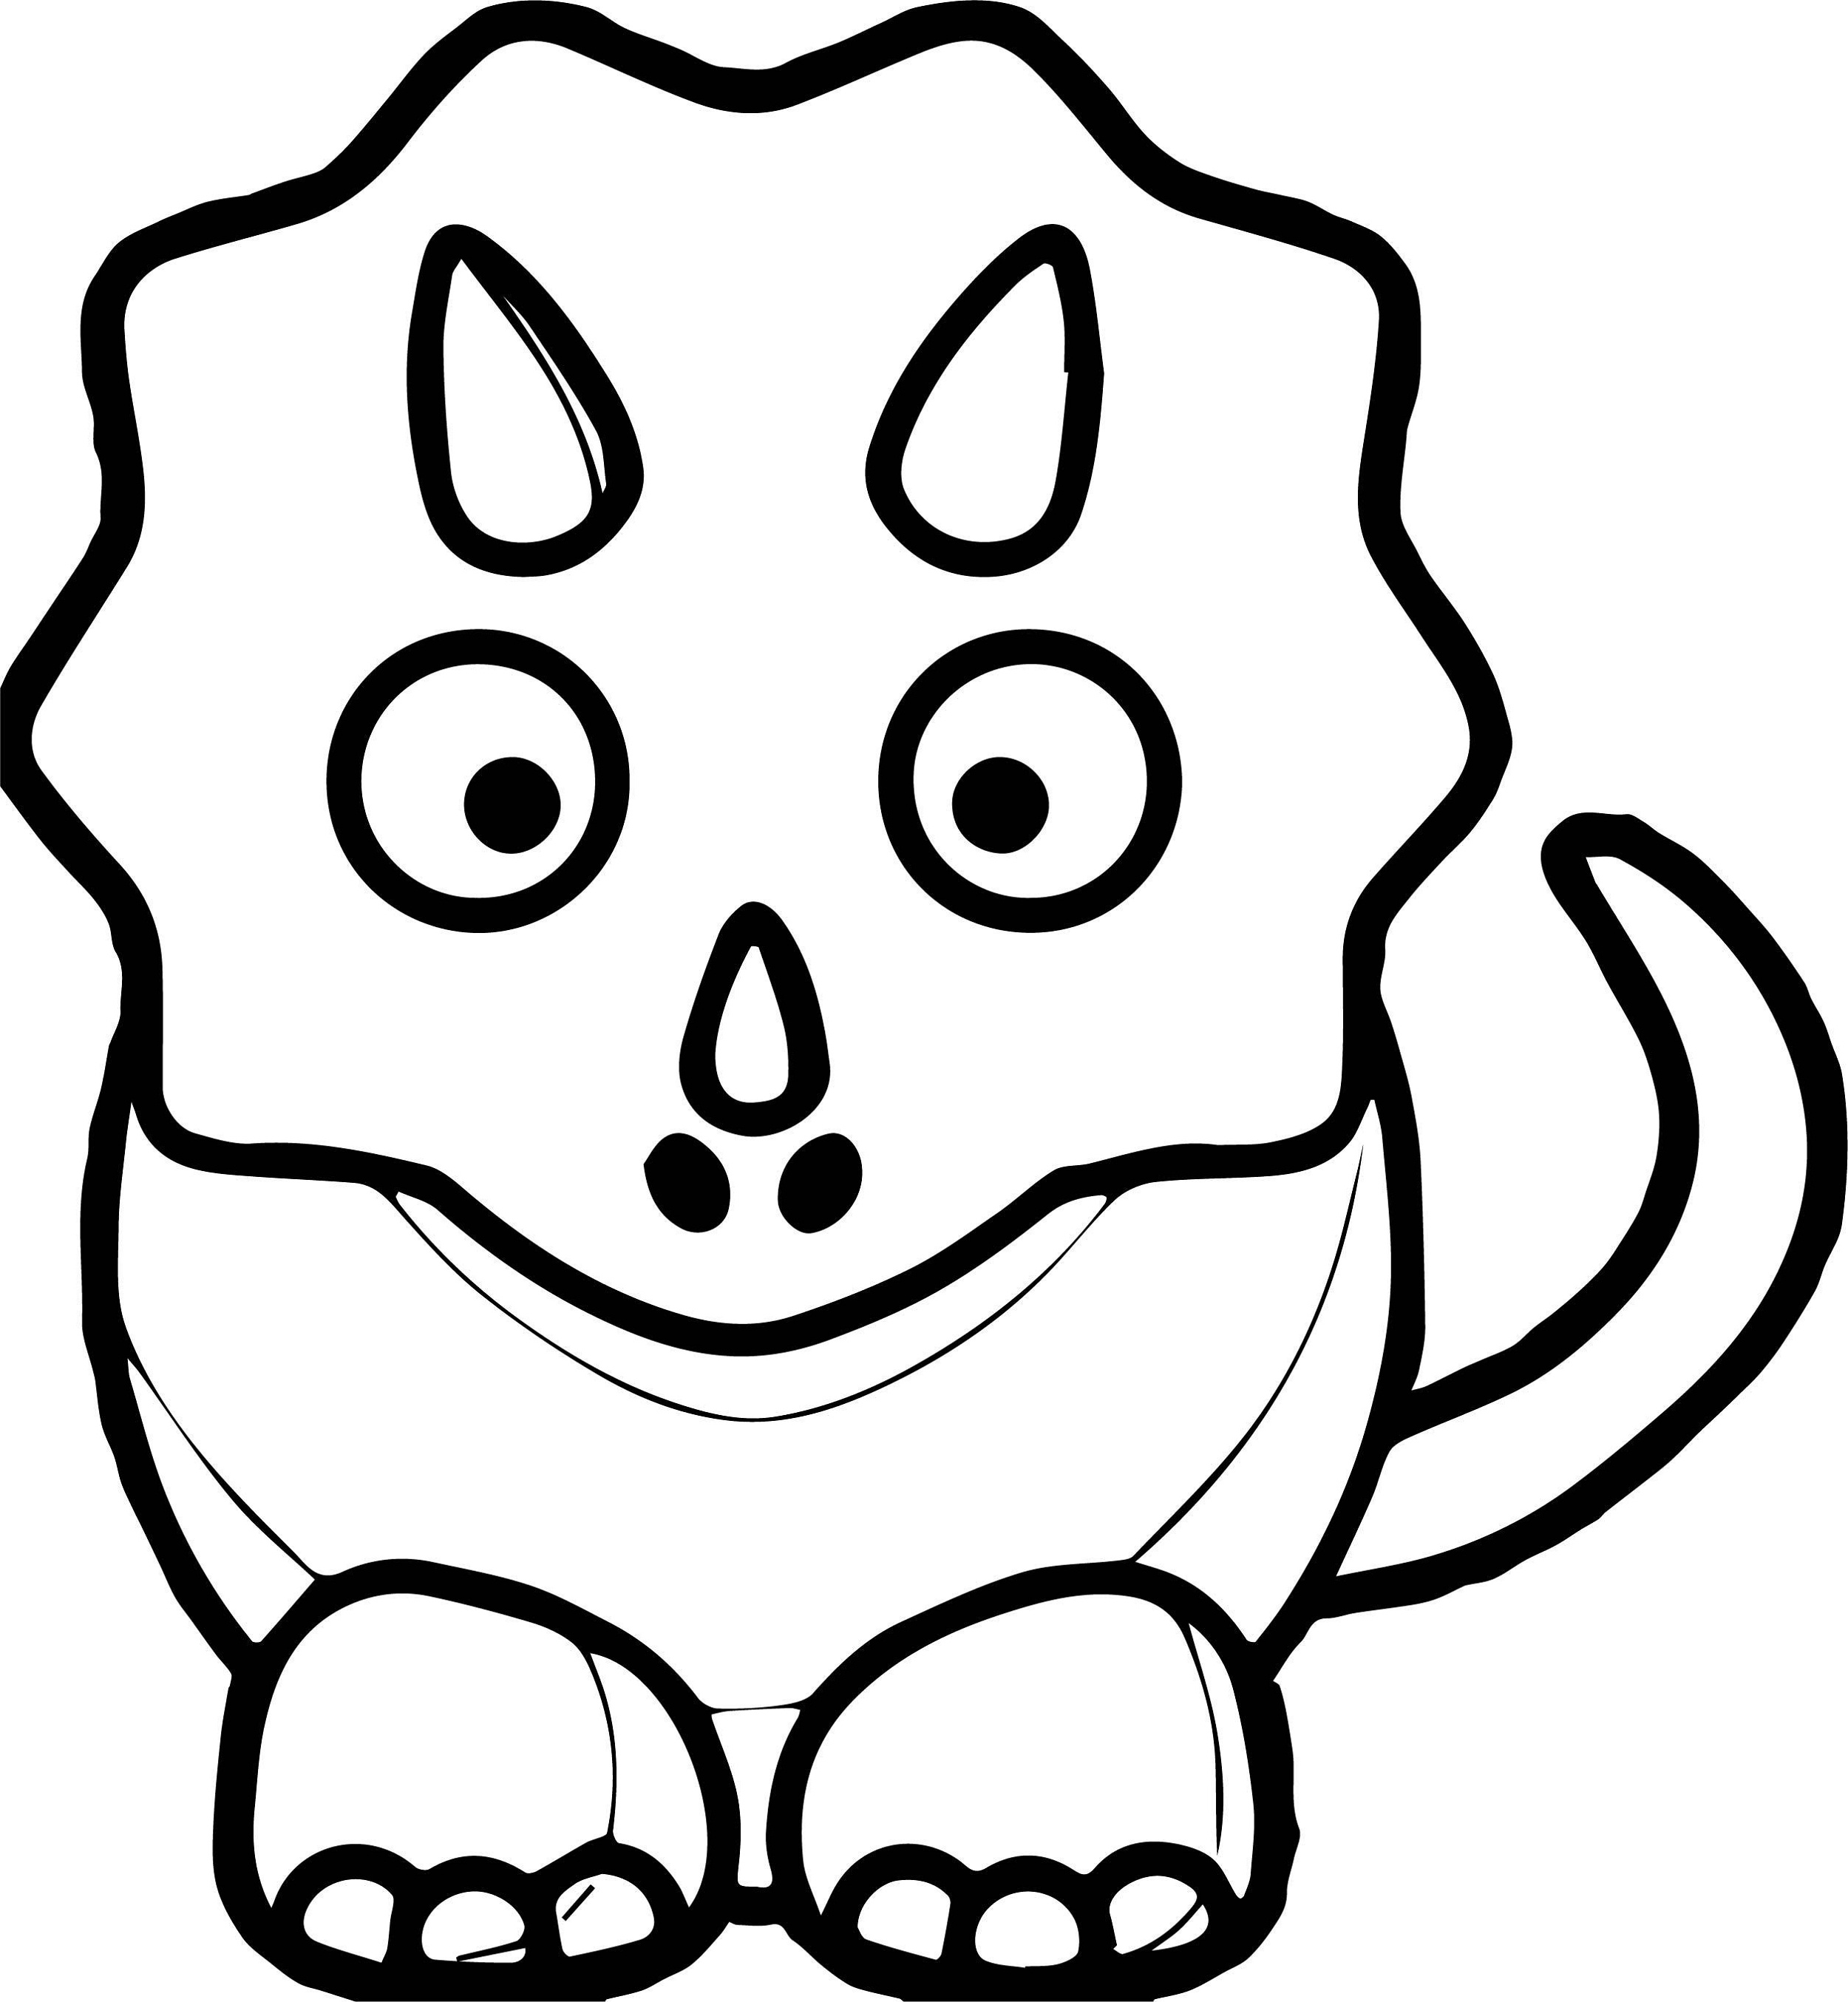 Baby Dinosaur Coloring Pictures Images Coloring Pages